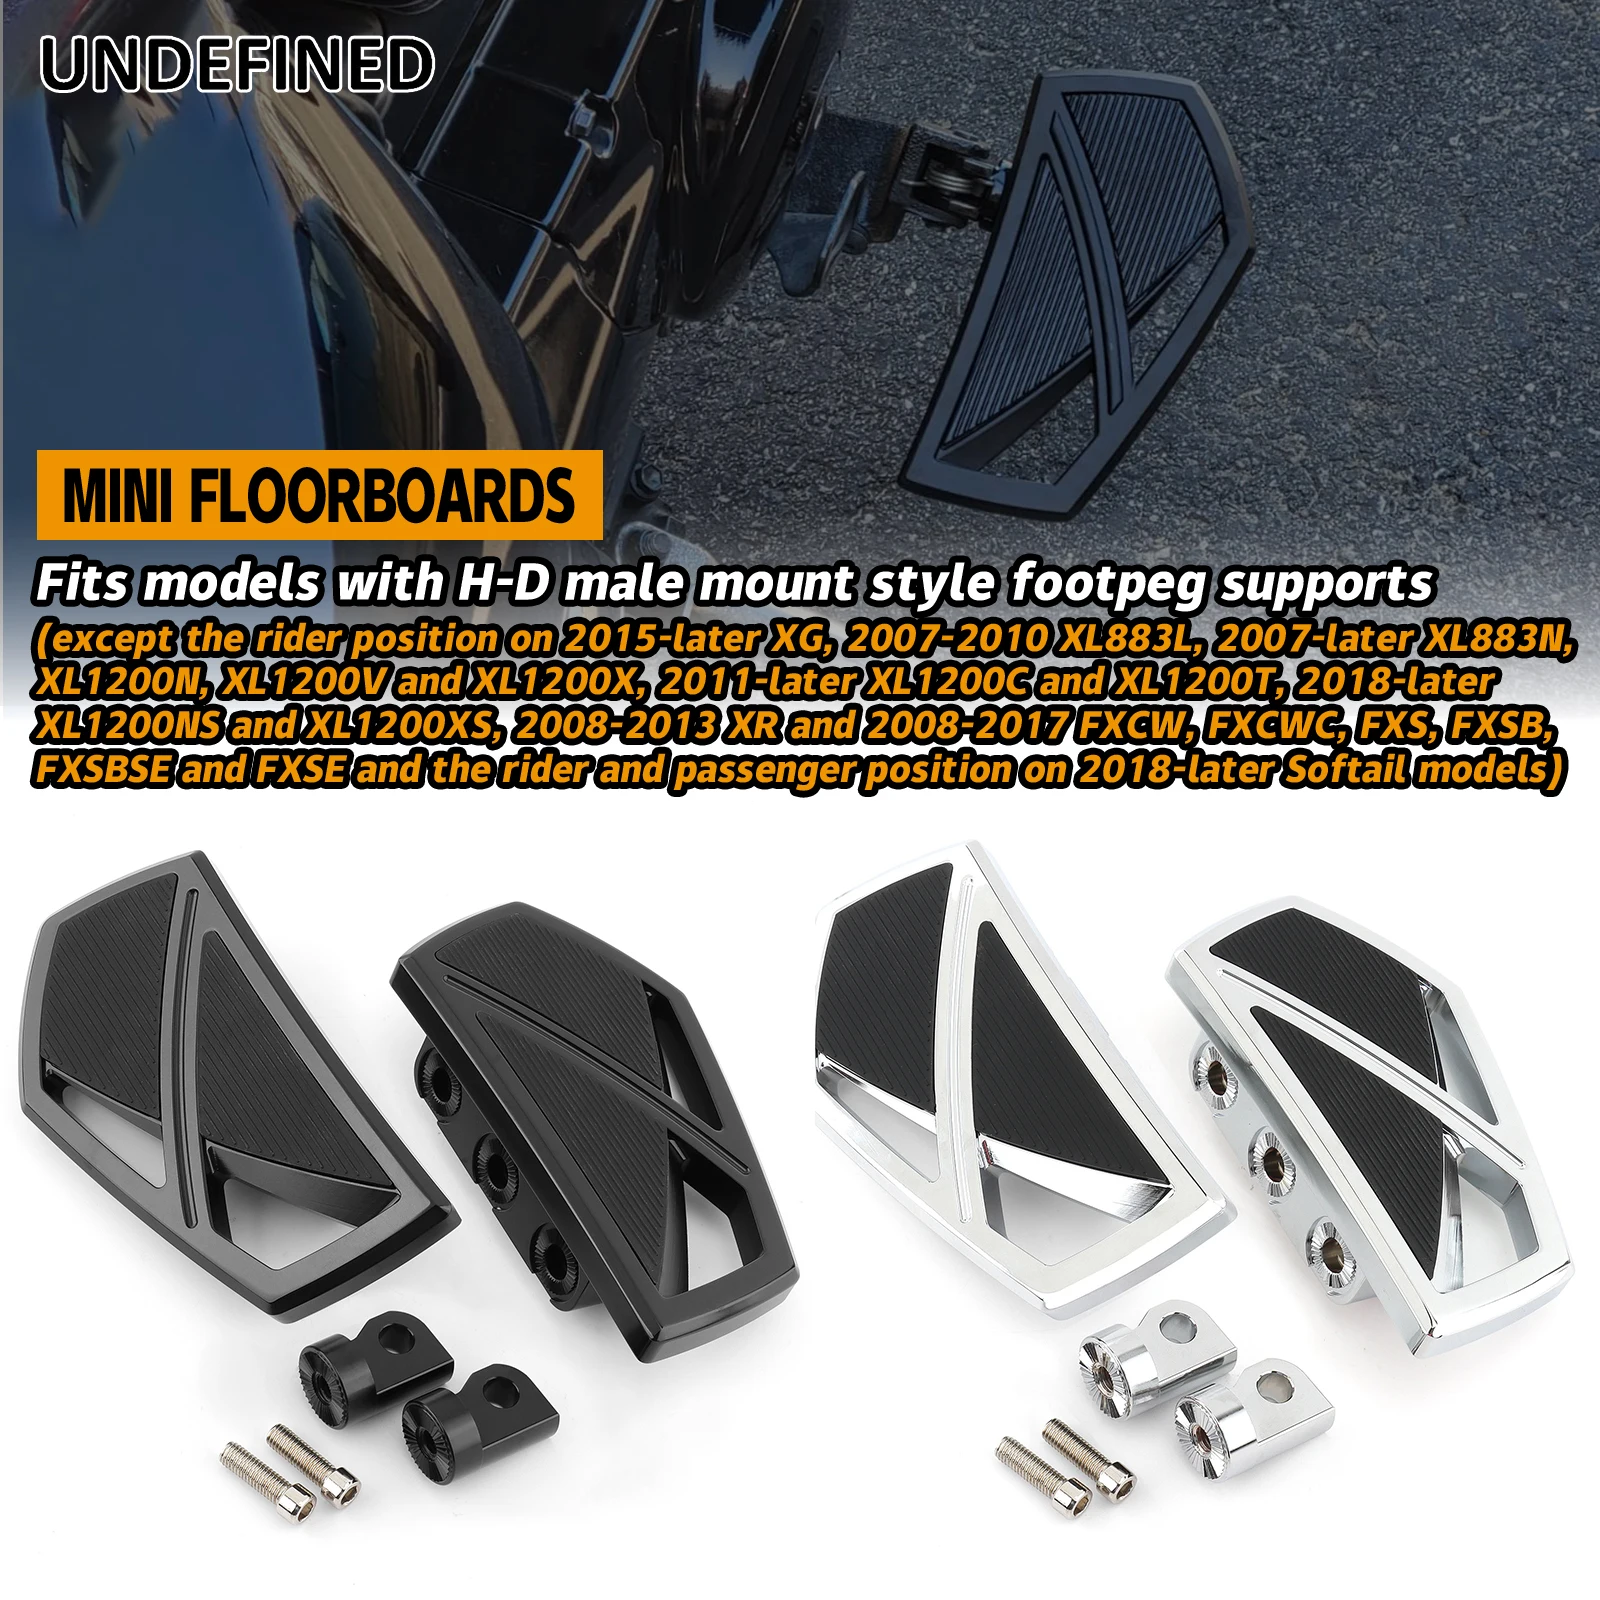 Ards phantom mini boards foot pegs for harley sportster 883 dyna street bob fxd softail thumb200